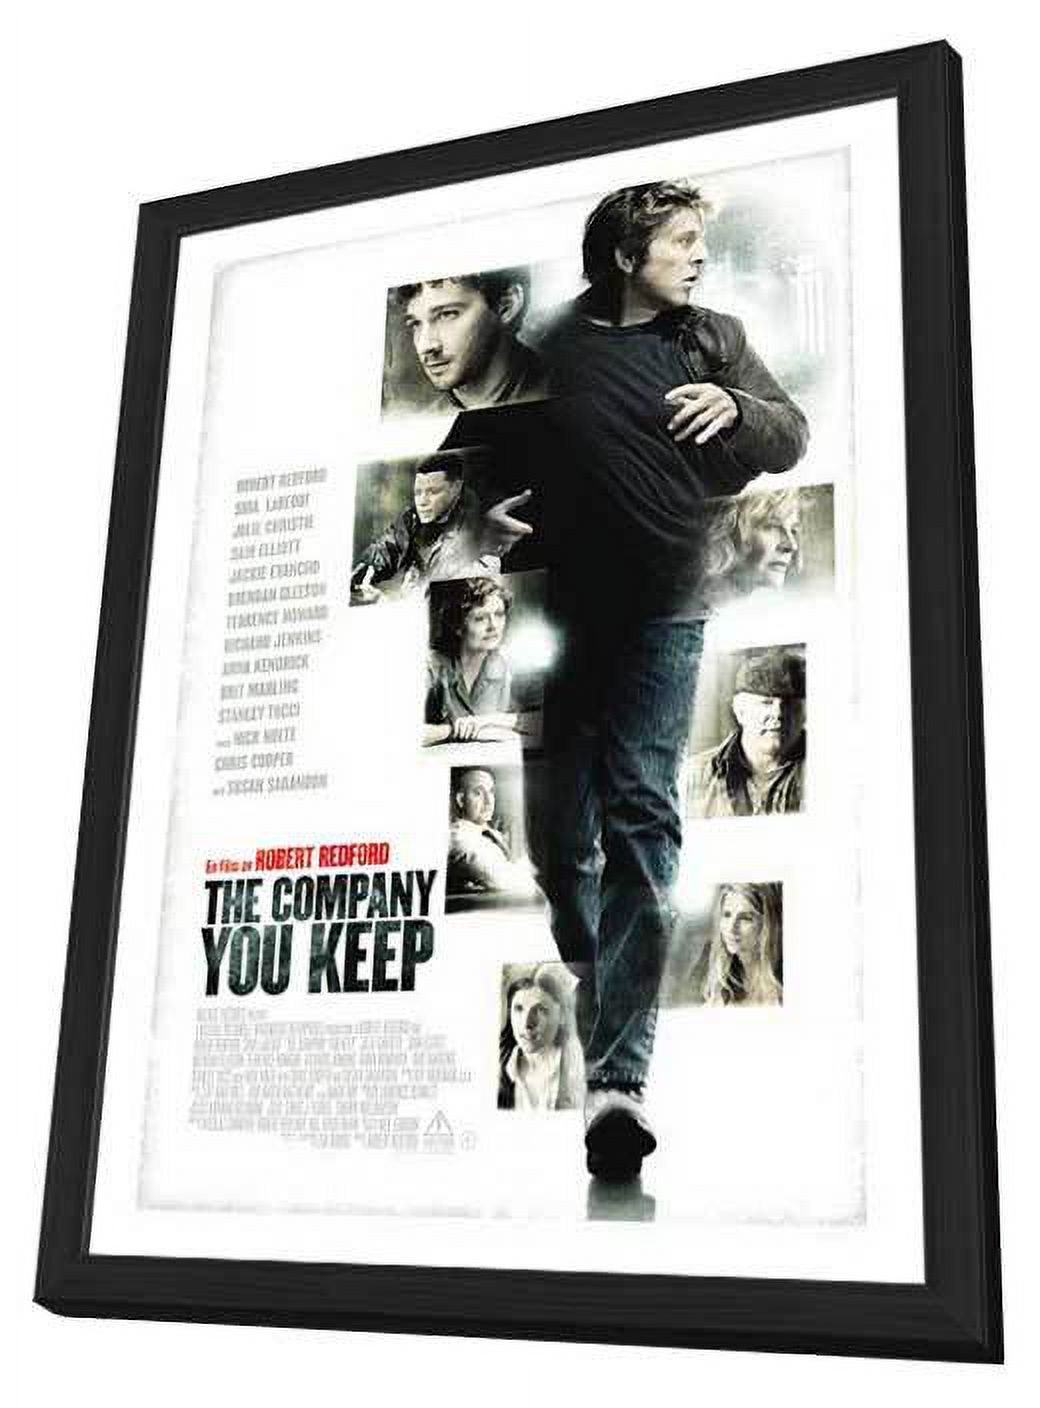 The Company You Keep (2013) 27x40 Framed Movie Poster (Swedish) - image 1 of 1